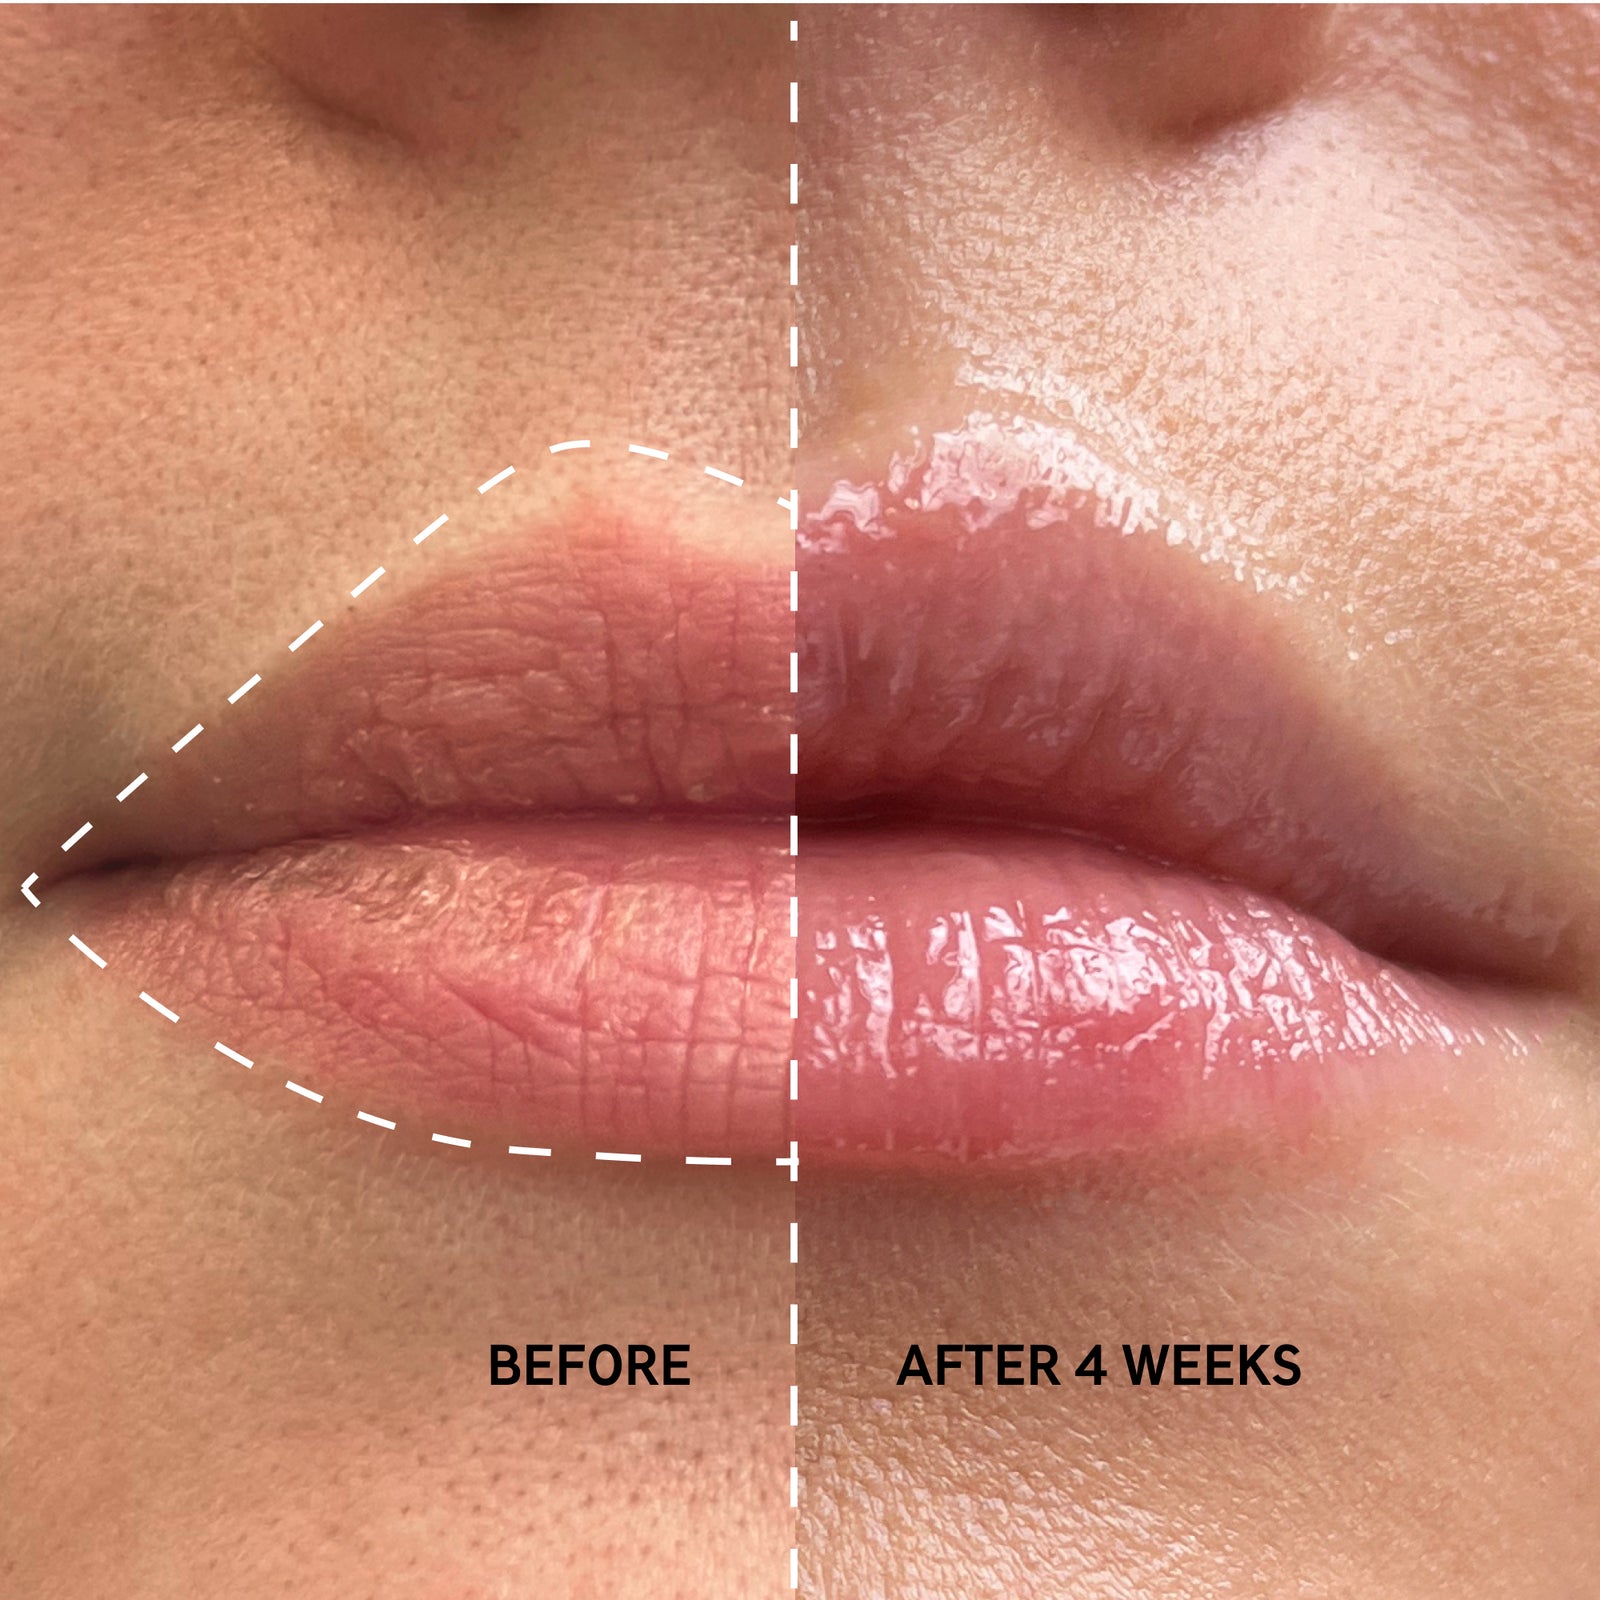 Before and after using Tripeptide Plumping Lip Balm for 4 weeks